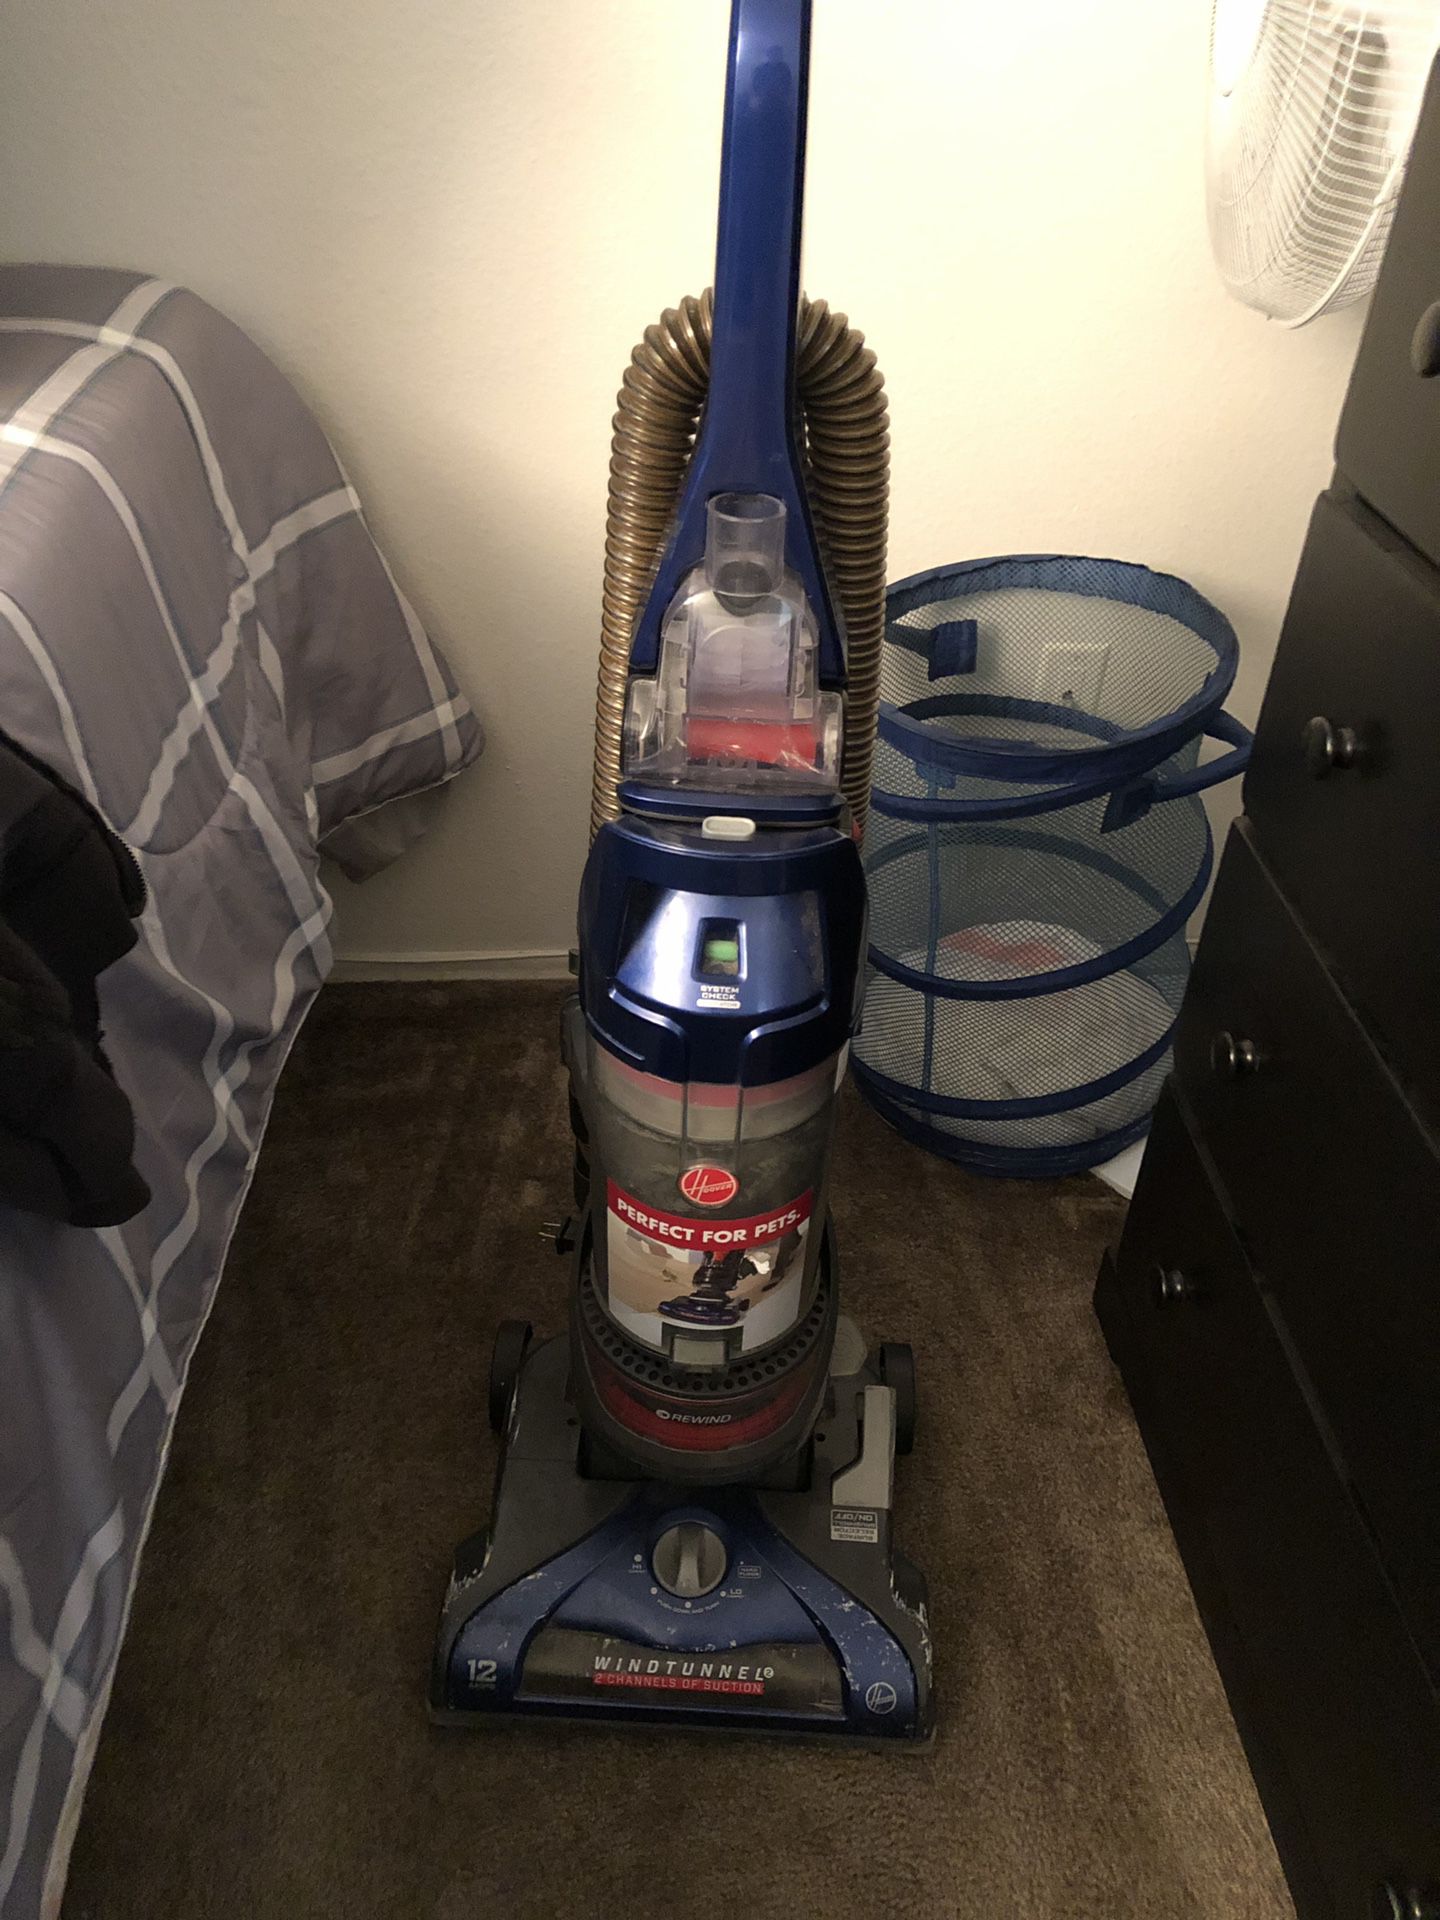 Hoover vacuum cord sucks in so no hassle cords out works great just bought a new shark